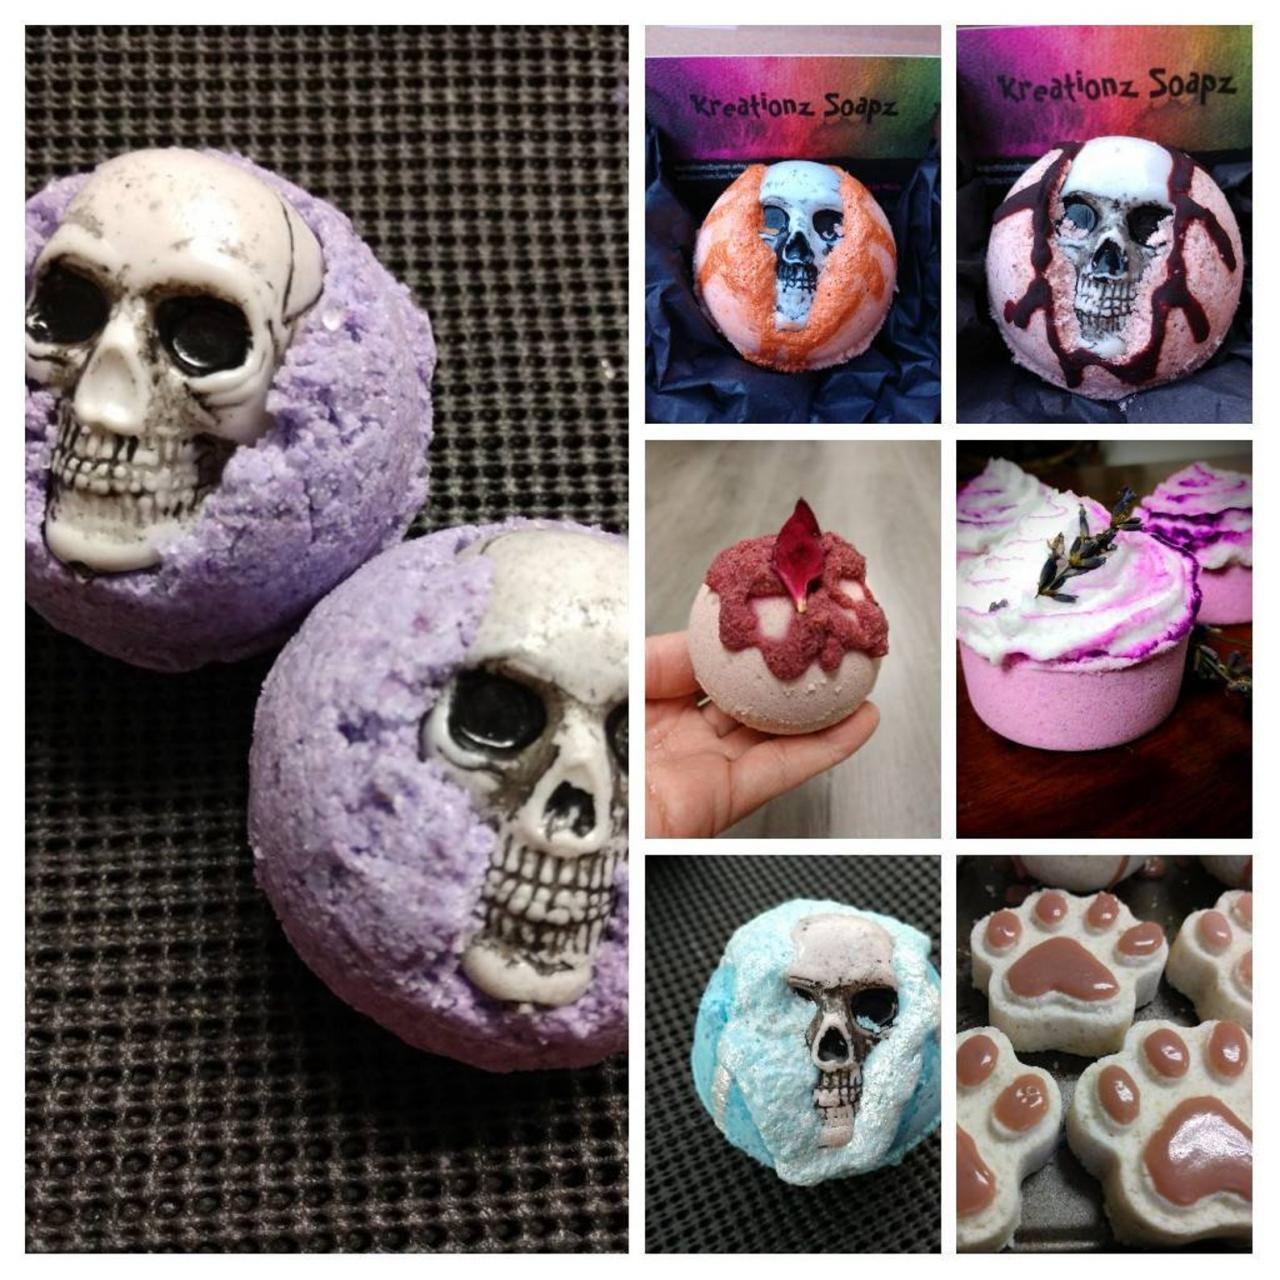 Mystery 6 Pack Of All Natural Bath Bombs Plus Bonus Soap!